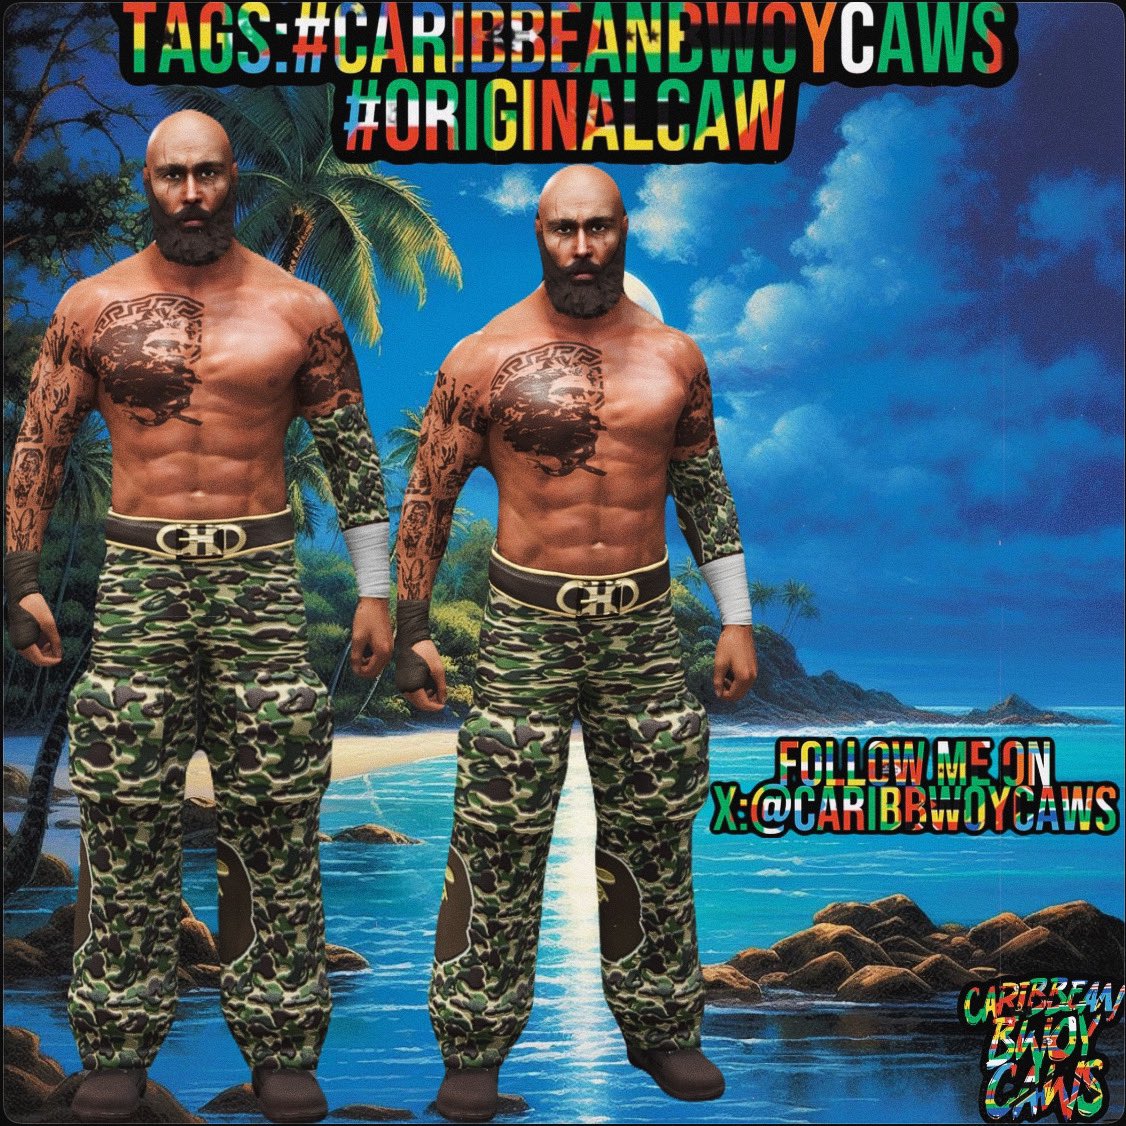 UPLOADED 3 OF MY ORIGINAL CAWS ON CC, THEIR ALL NOW AVAILABLE TO DOWNLOAD.

1.LUCAS AUBREY
2.JAY OSMOSIS
3.JACK OXX

ALL 3 COMES WITH CUSTOM MOVESET,ENTRANCE & TATTOOS BY ME, SHOUTOUT @TrapHouseCaws FOR THE TIMBALANDS ON JACK. 

TAGS ARE #CARIBBEANBWOYCAWS #CBC #ORIGINALCAW